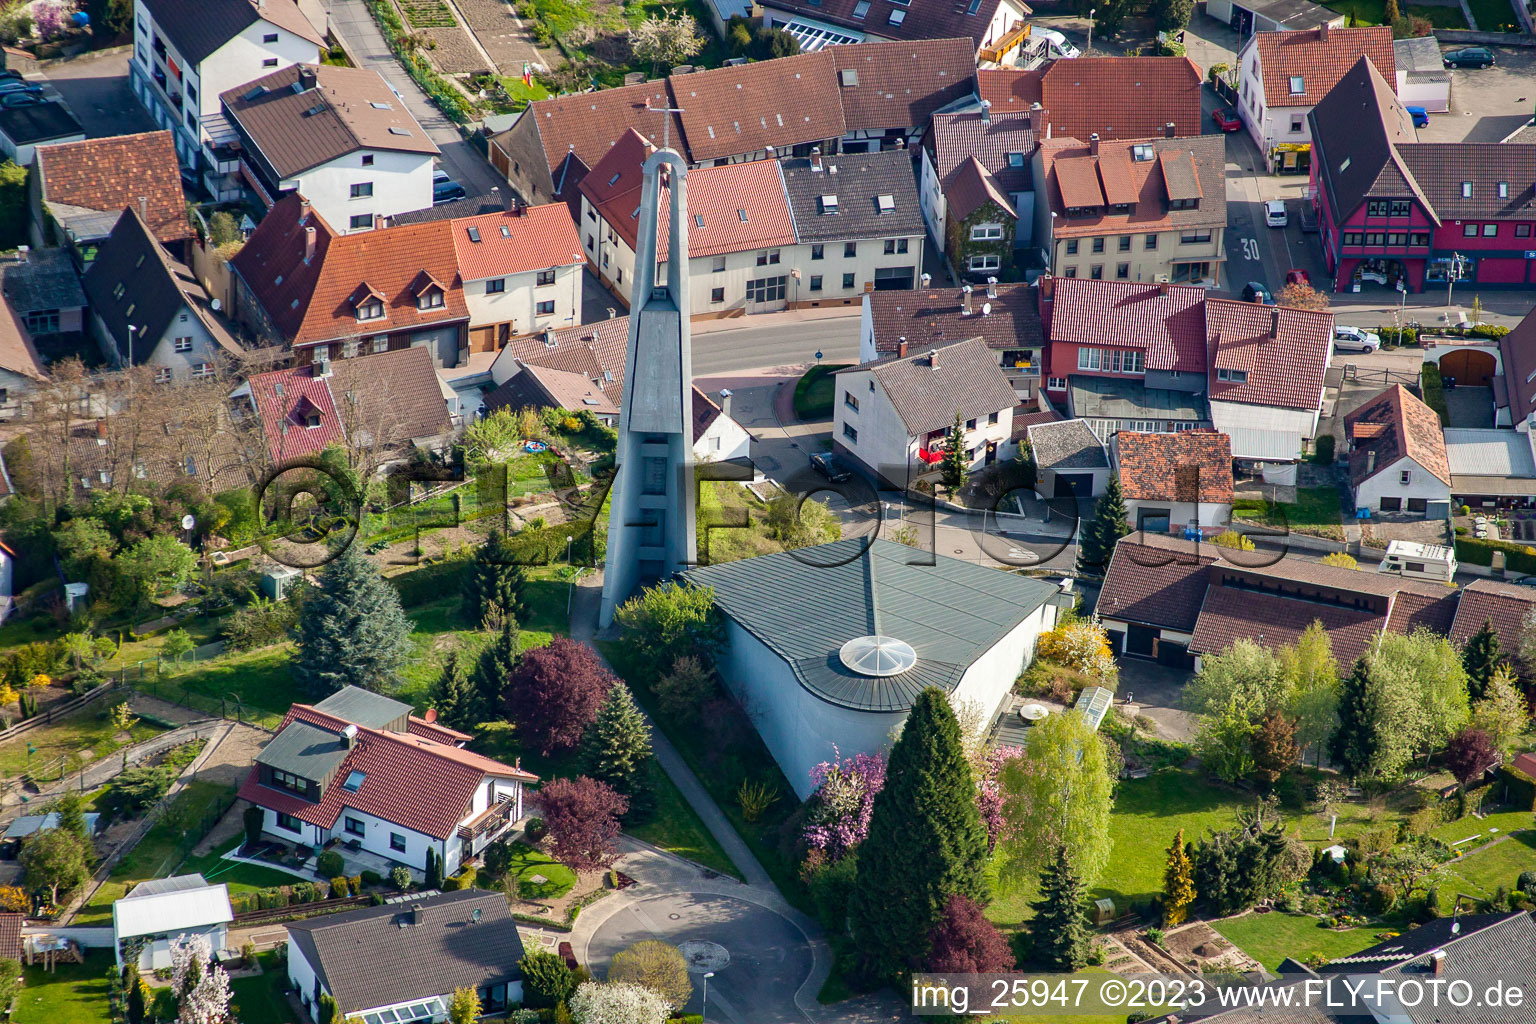 Catholic church from the south in the district Berghausen in Pfinztal in the state Baden-Wuerttemberg, Germany